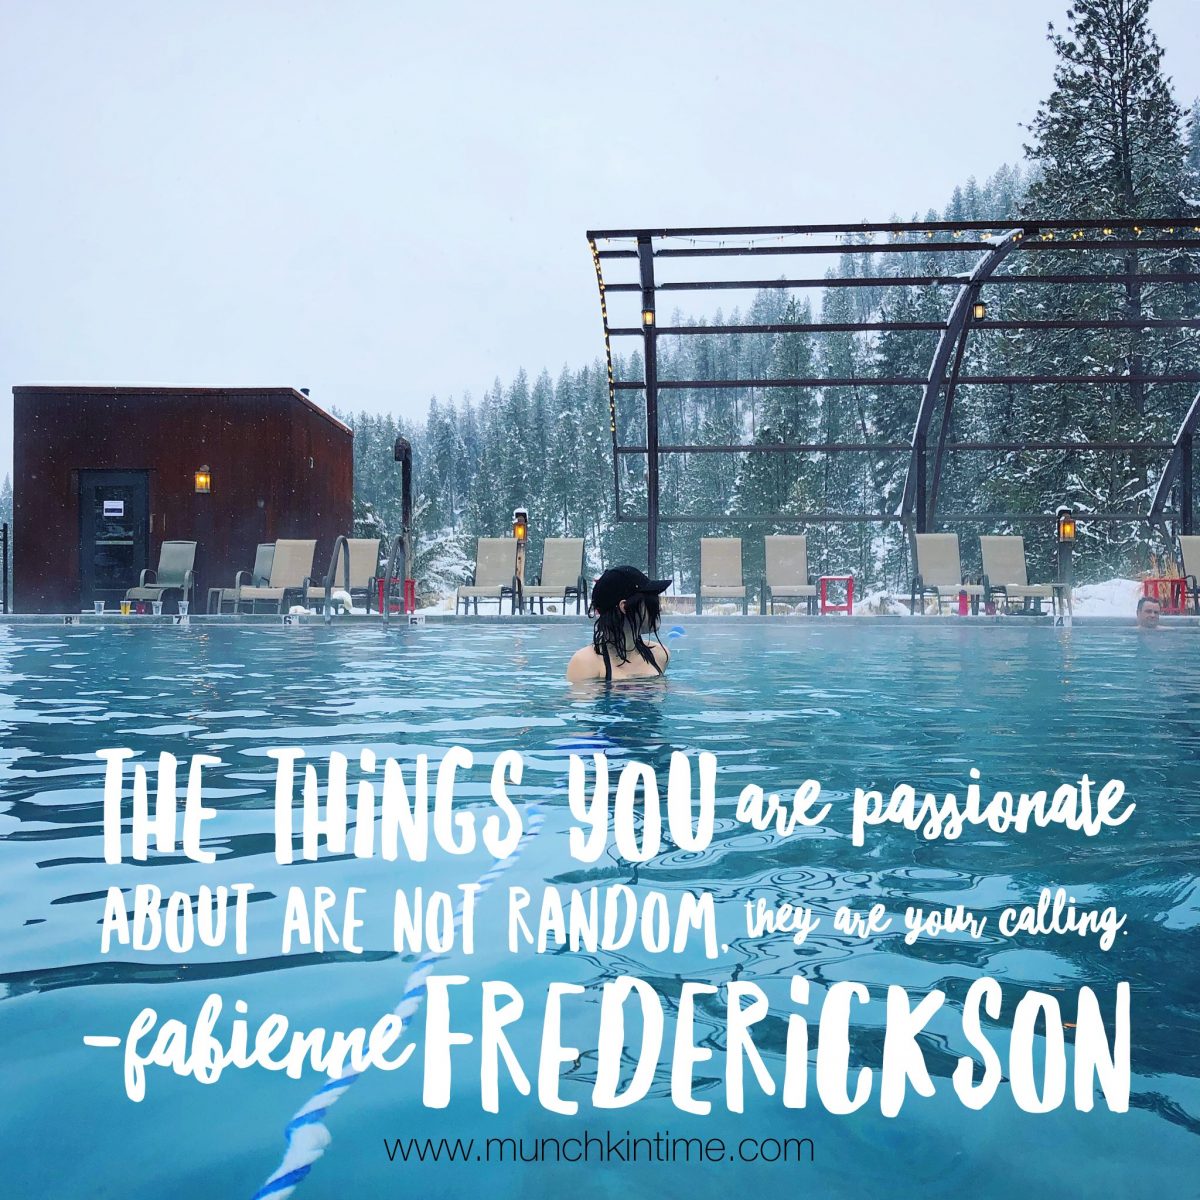 Fabienne Fredrickson - 'Things you are passionate about are not accidental, they are your calling.'